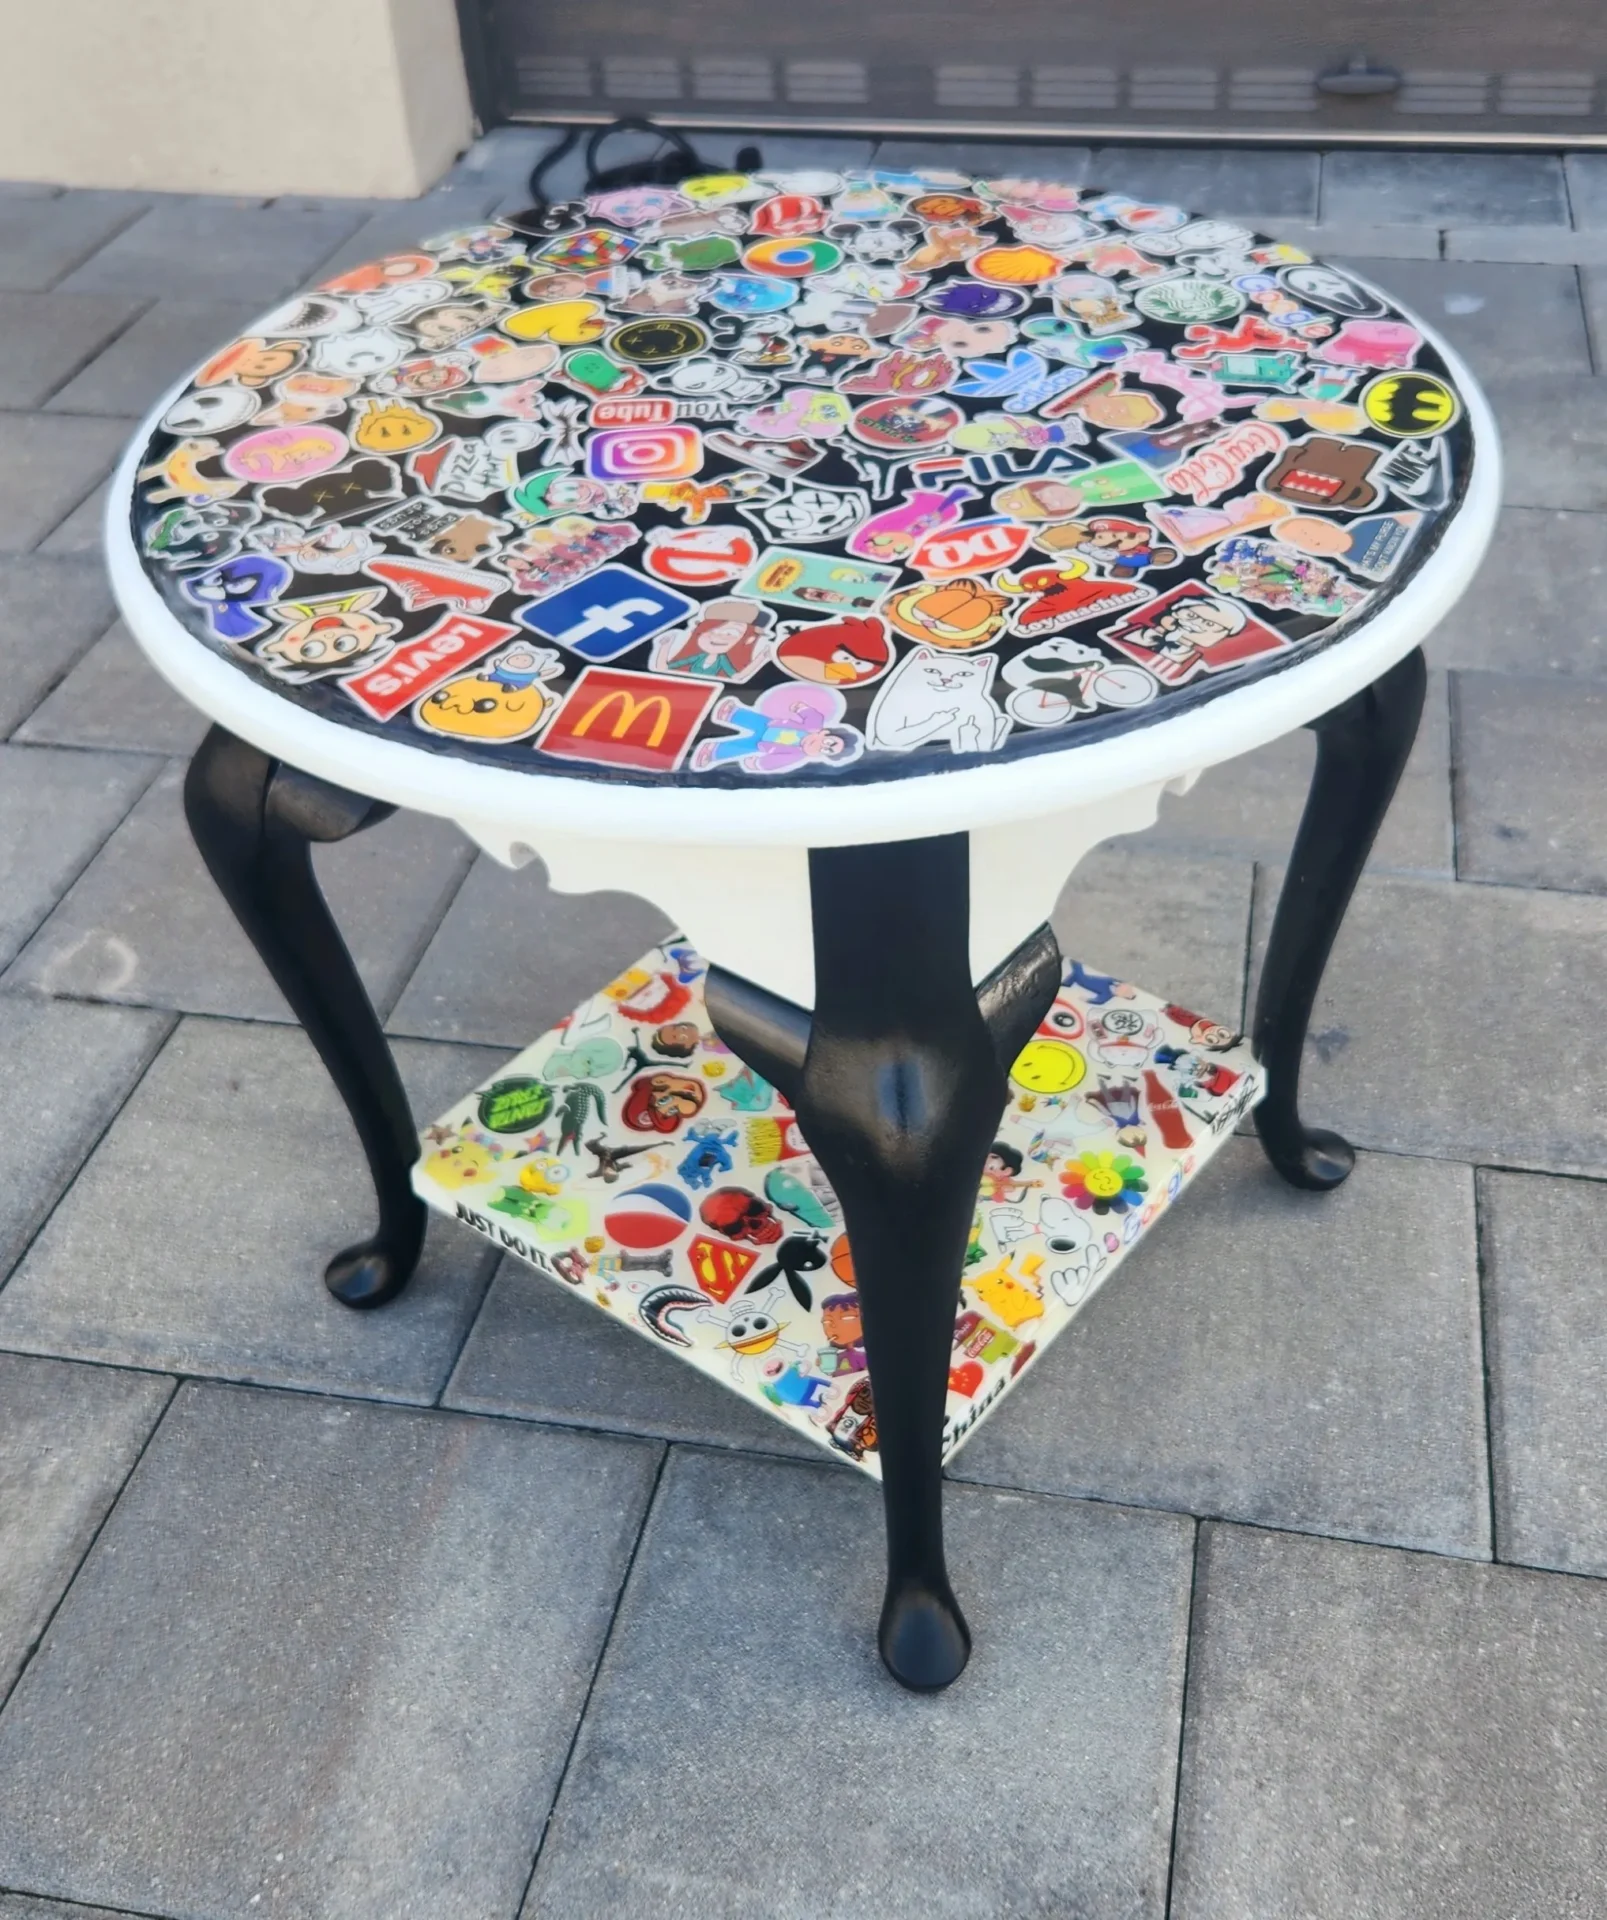 A table with many different stickers on it